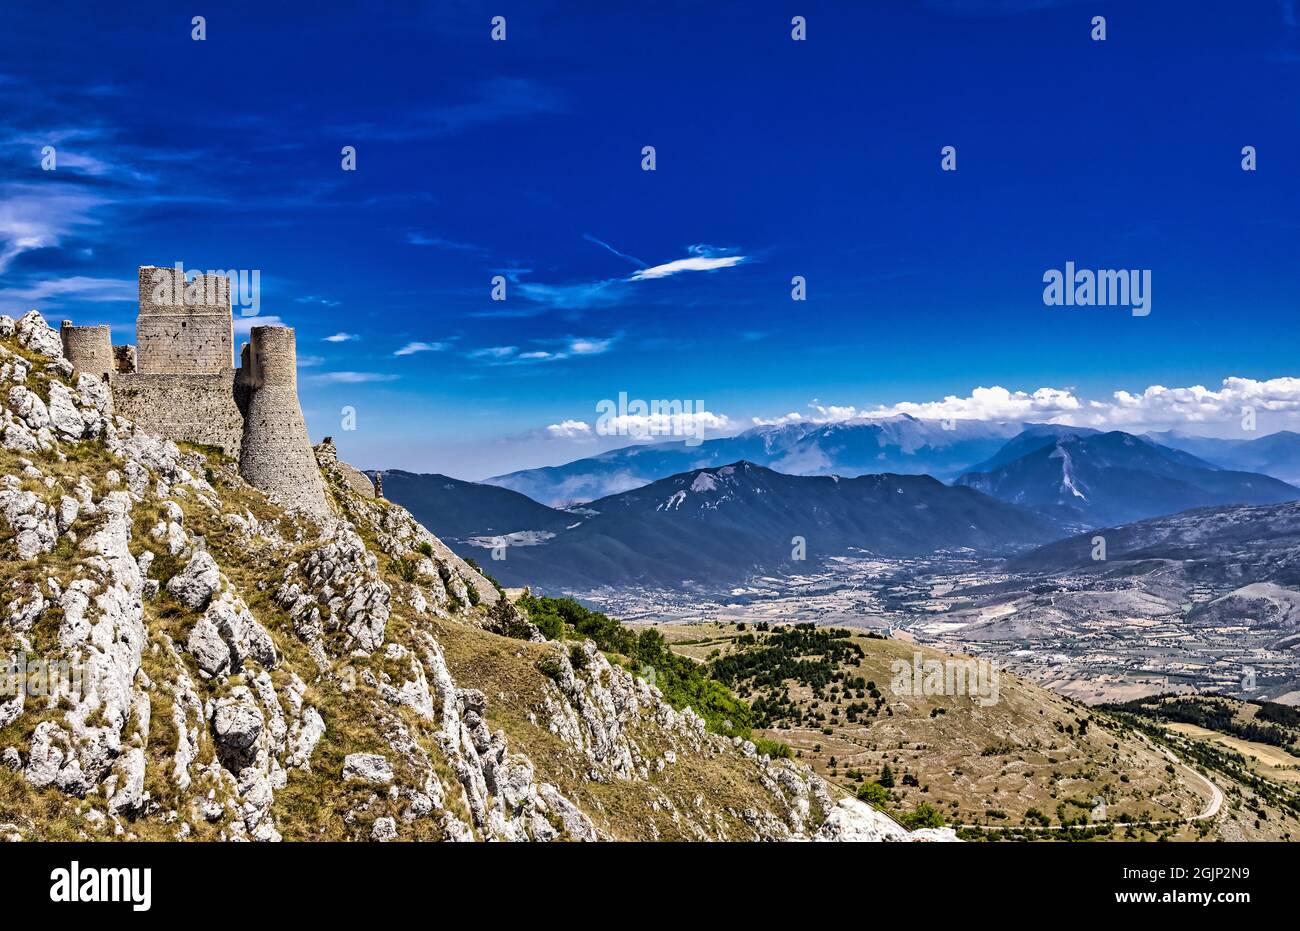 Ruined and abandoned dreamlike medieval castle on a mountain peak in Rocca Calascio, L'Aquila, Italy Stock Photo